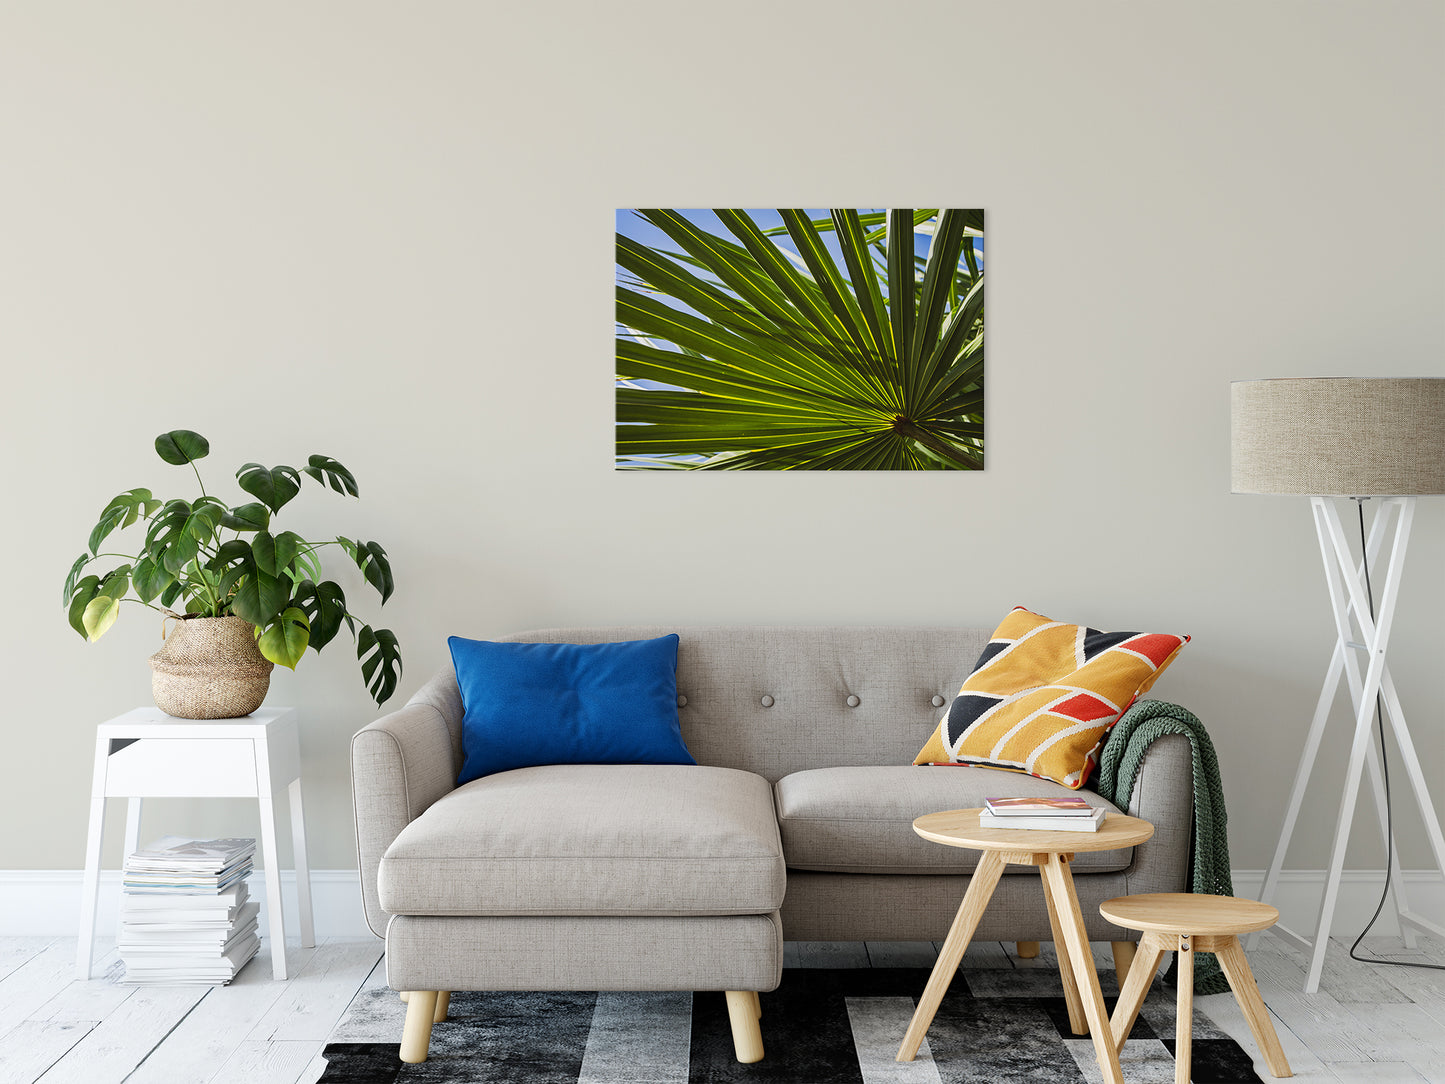 Colorized Wide Palm Leaves Nature / Botanical Photo Fine Art Canvas Wall Art Prints 24" x 36" - PIPAFINEART